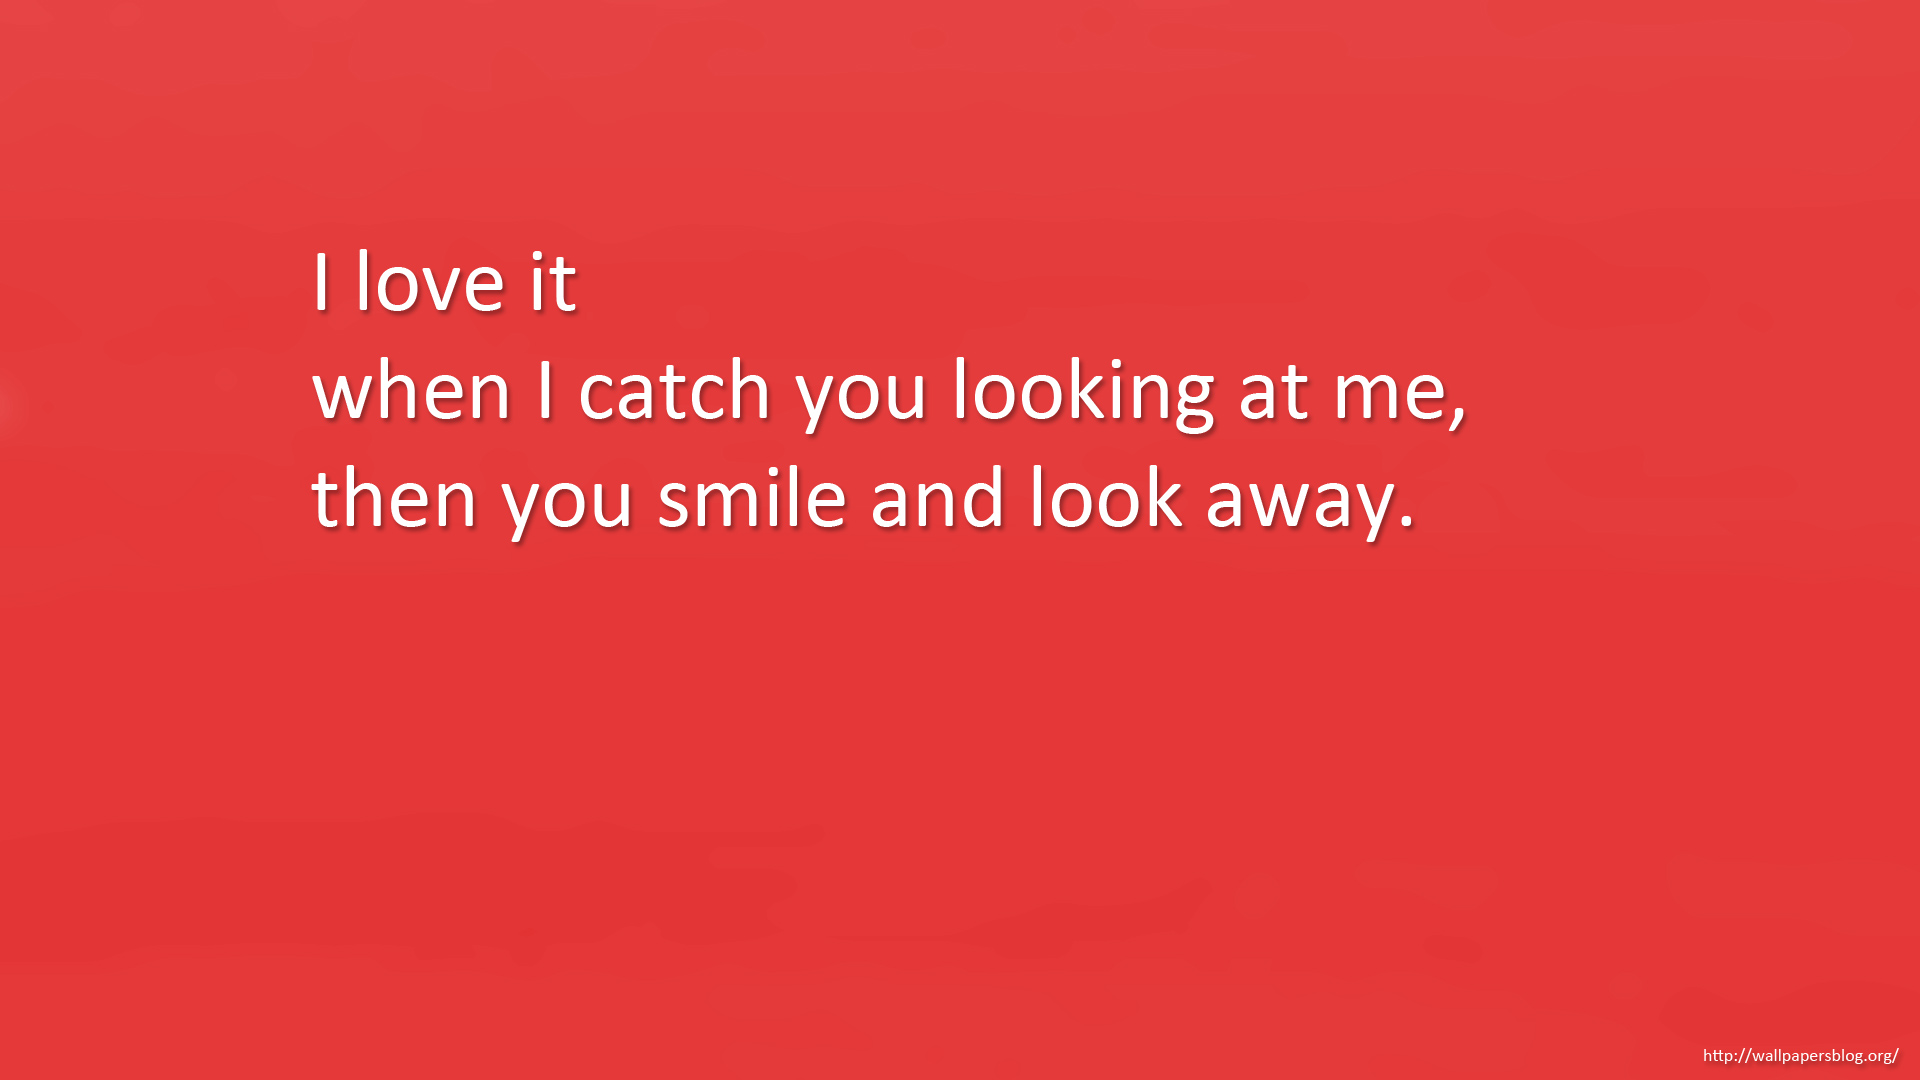 Full HD Quote Wallpaper 1080p I Love It When Catch You Looking At Me